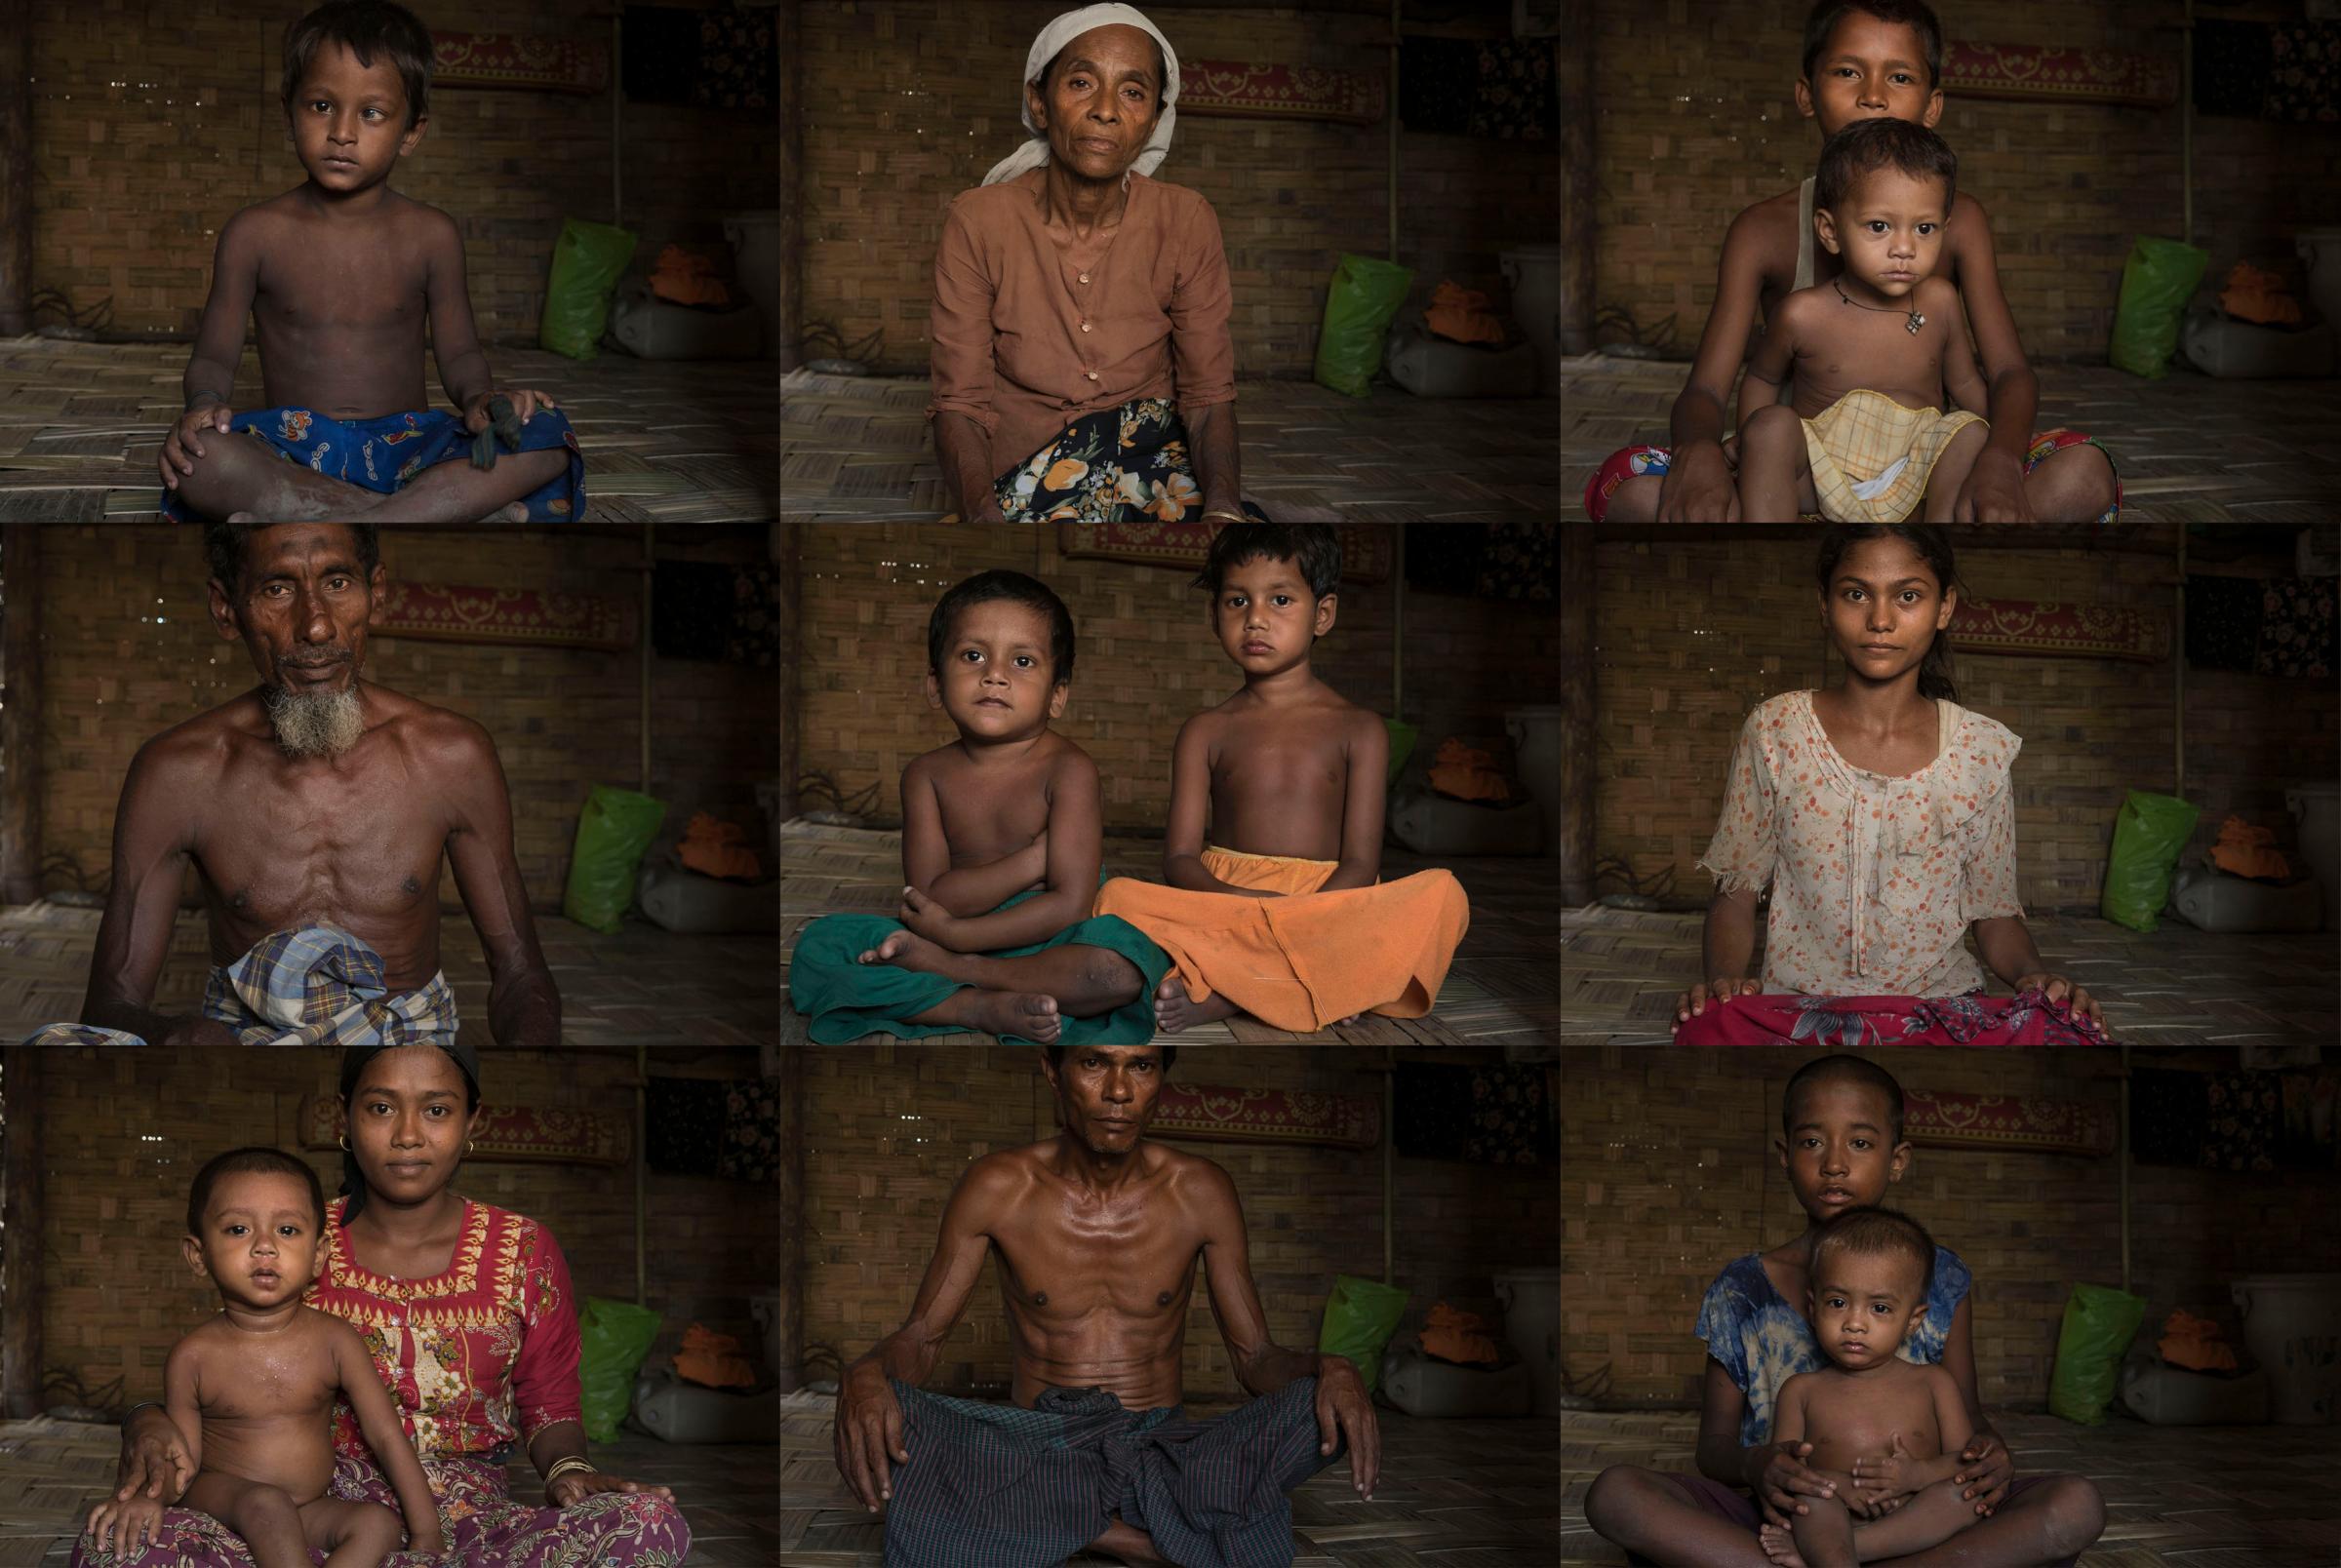 MYANMAR. Sittwe. June, 2016. Rohingya people in the Internally Displaced Person (IDP) camps in Sittwe. An estimated 140,000 Rohingya are placed in the IDP camps guarded by the armed police and military.